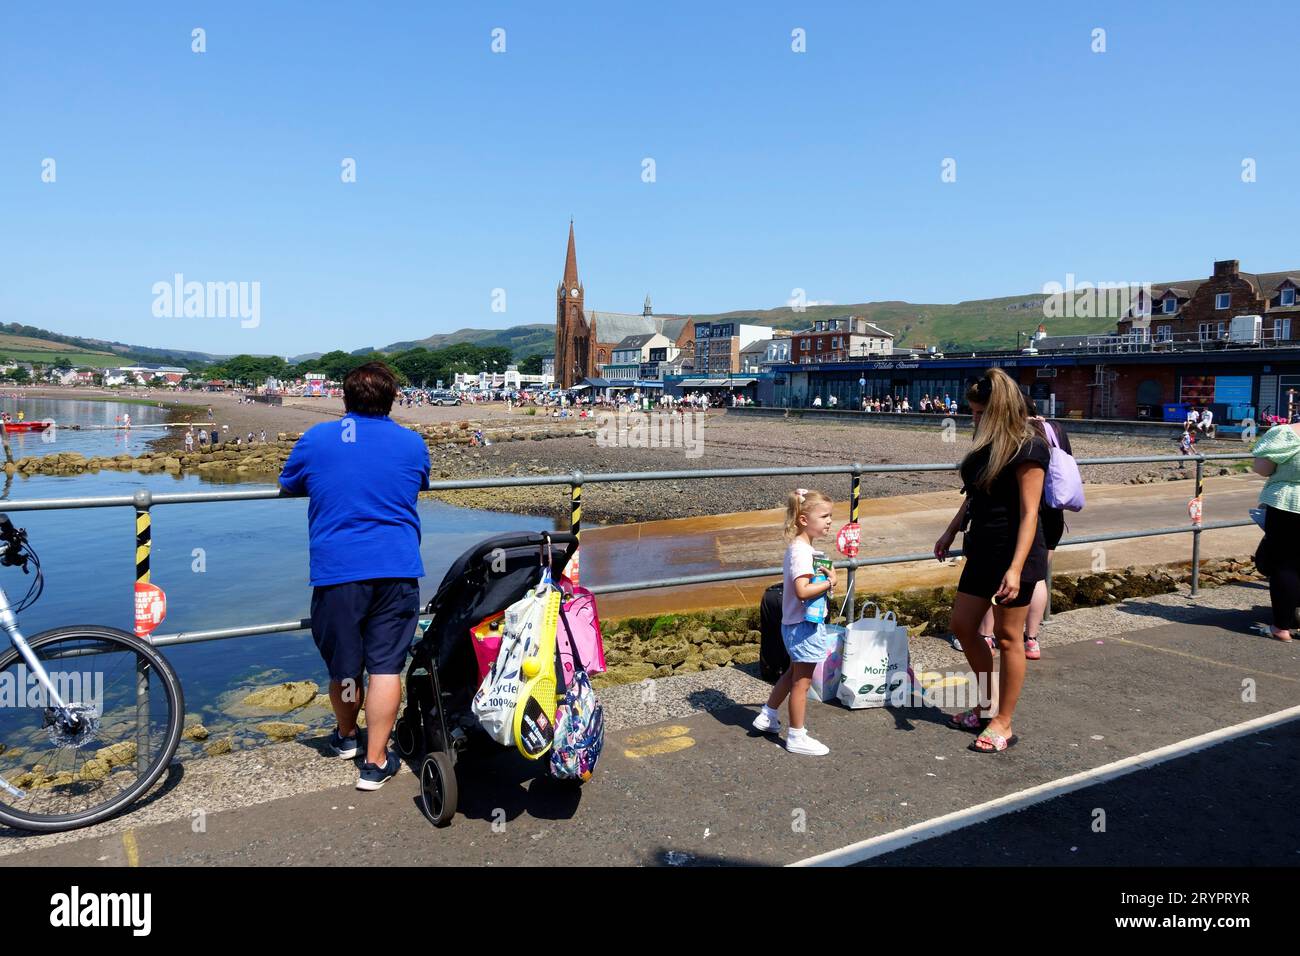 People queuing in Largs, Ayrshire, for the ferry to Cumbrae a popular Scottish Island. Stock Photo